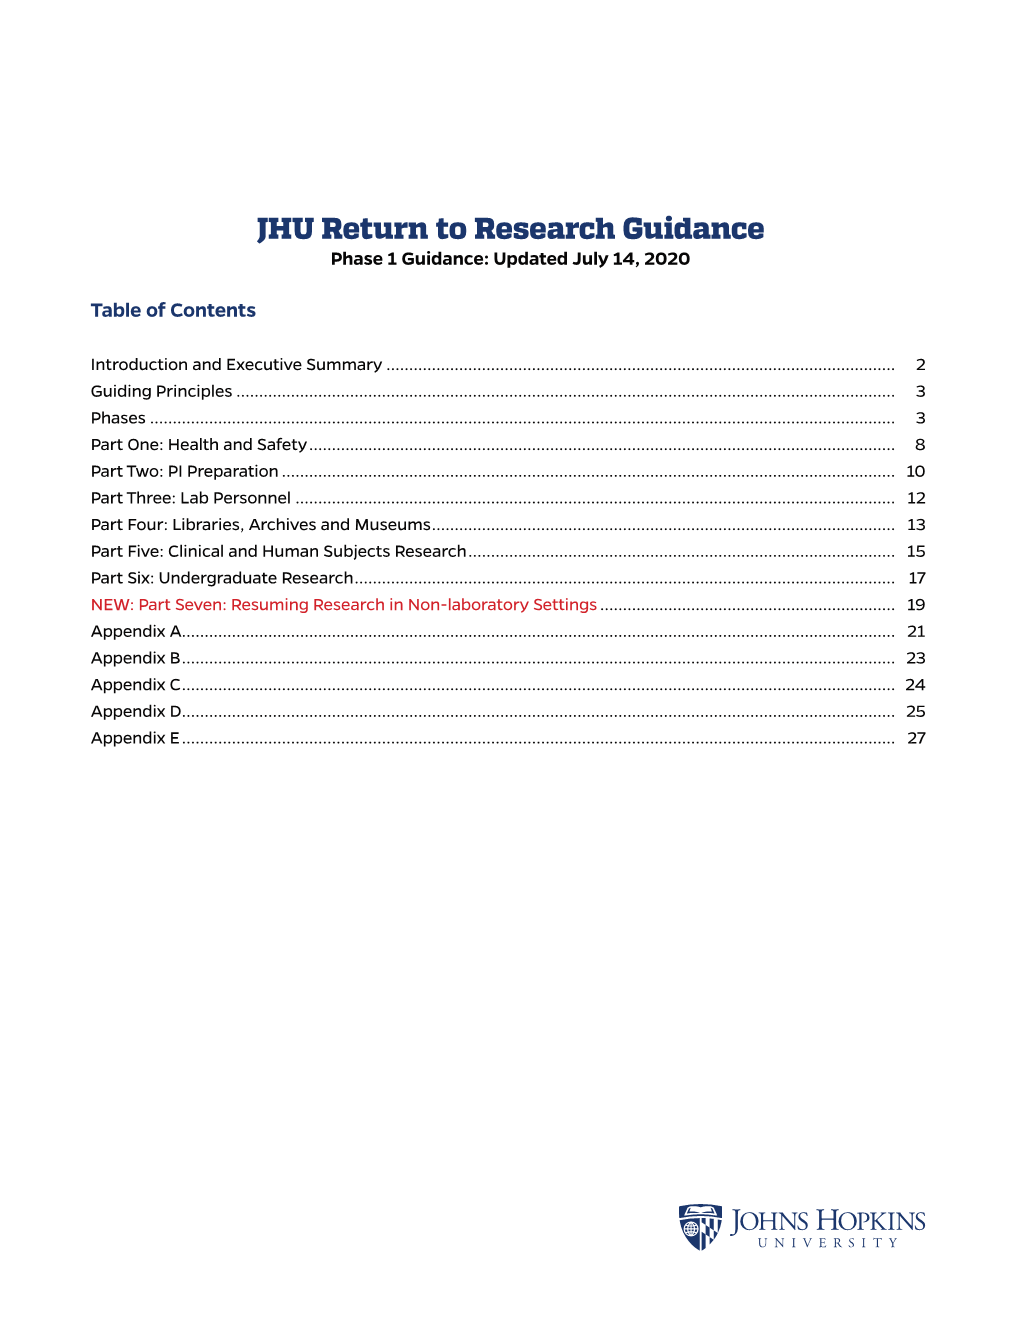 JHU Return to Research Guidance Phase 1 Guidance: Updated July 14, 2020